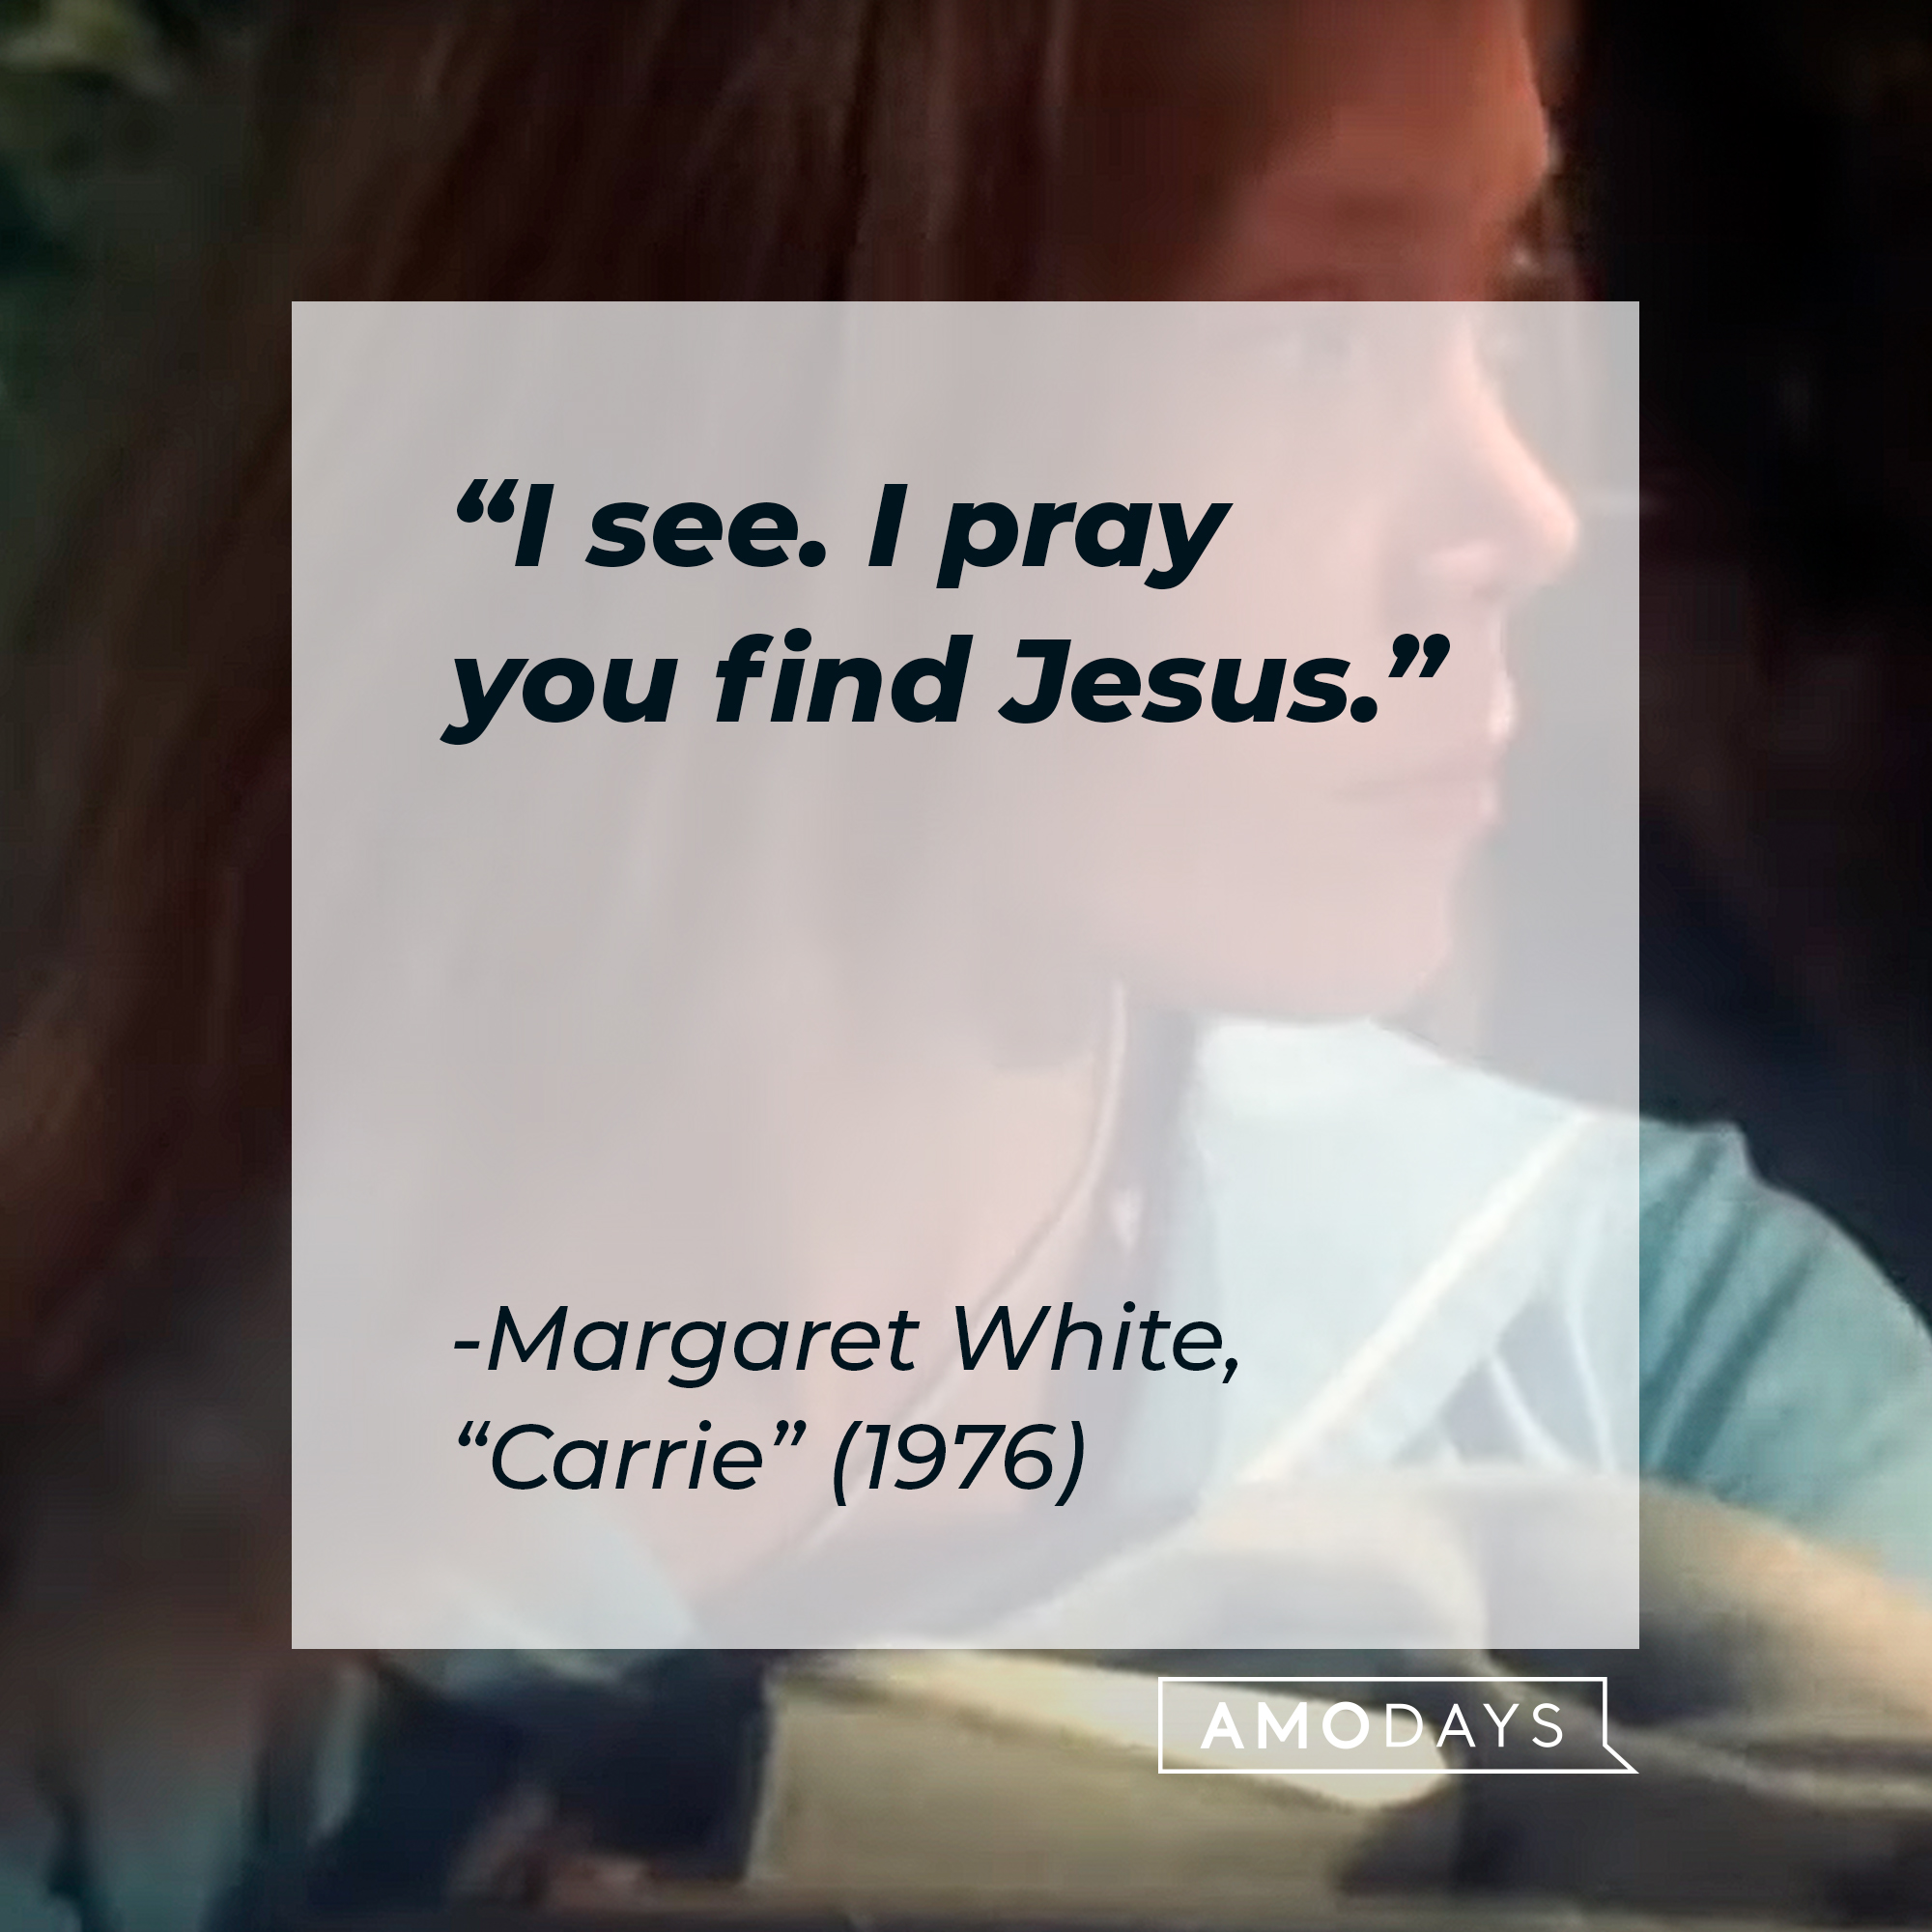 Margaret White's quote: "I see. I pray you find Jesus." | Source: youtube.com/MGMStudios